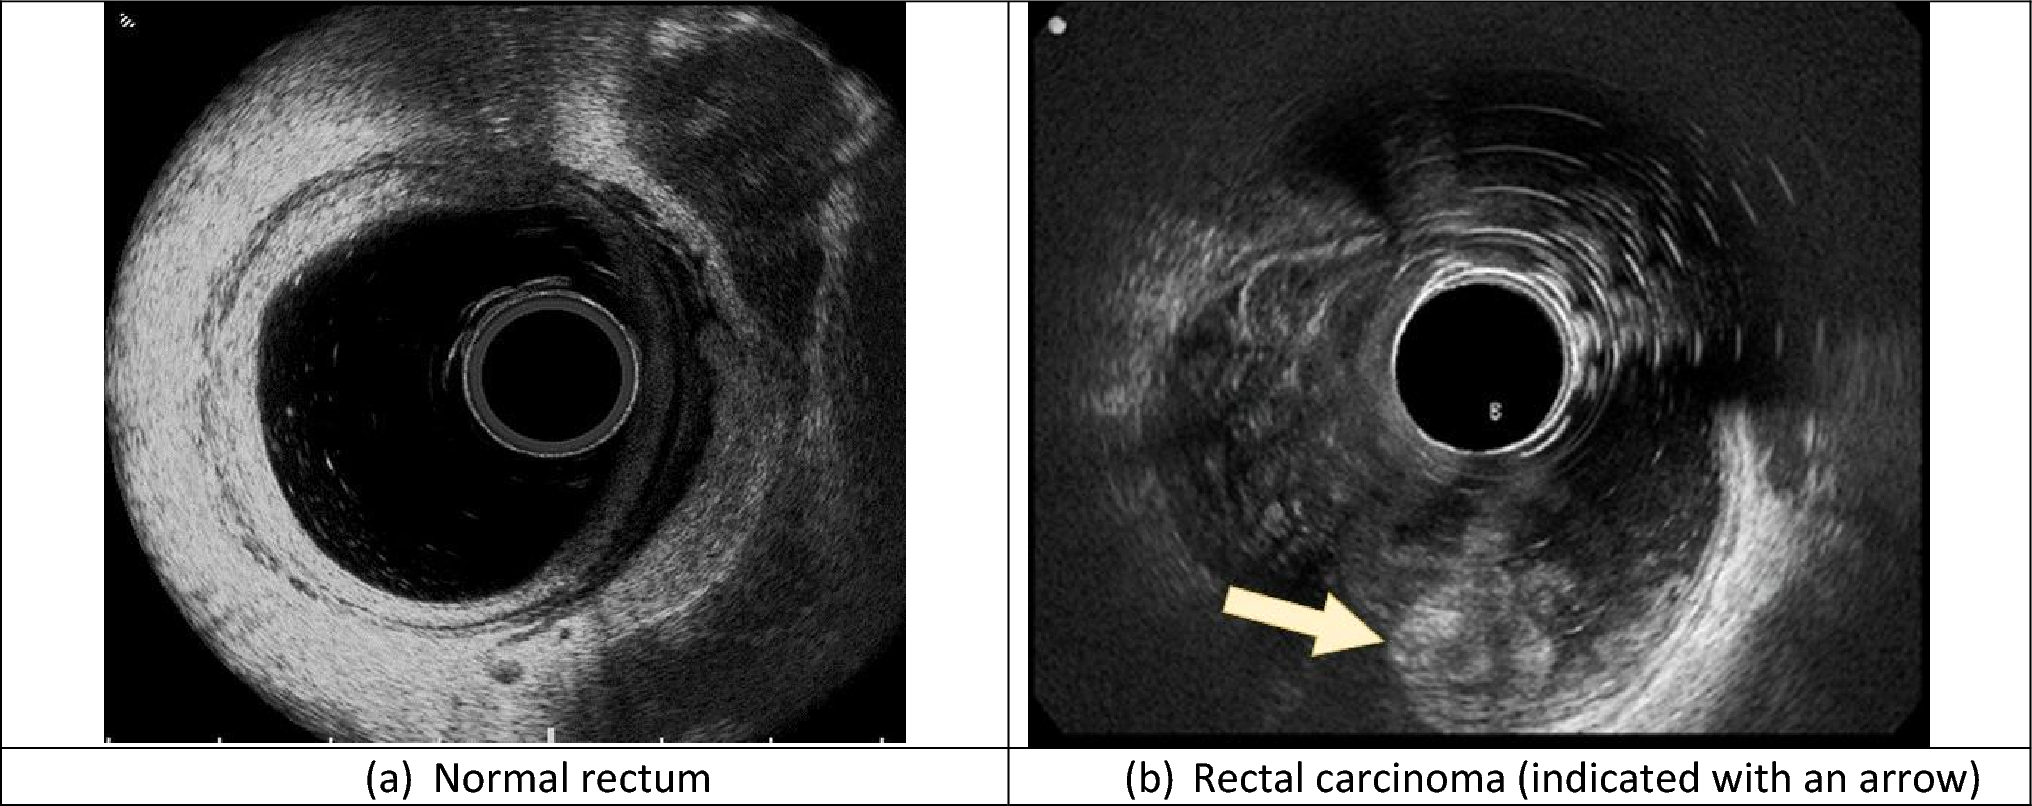 Convolutional neural network deep learning model accurately detects rectal cancer in endoanal ultrasounds